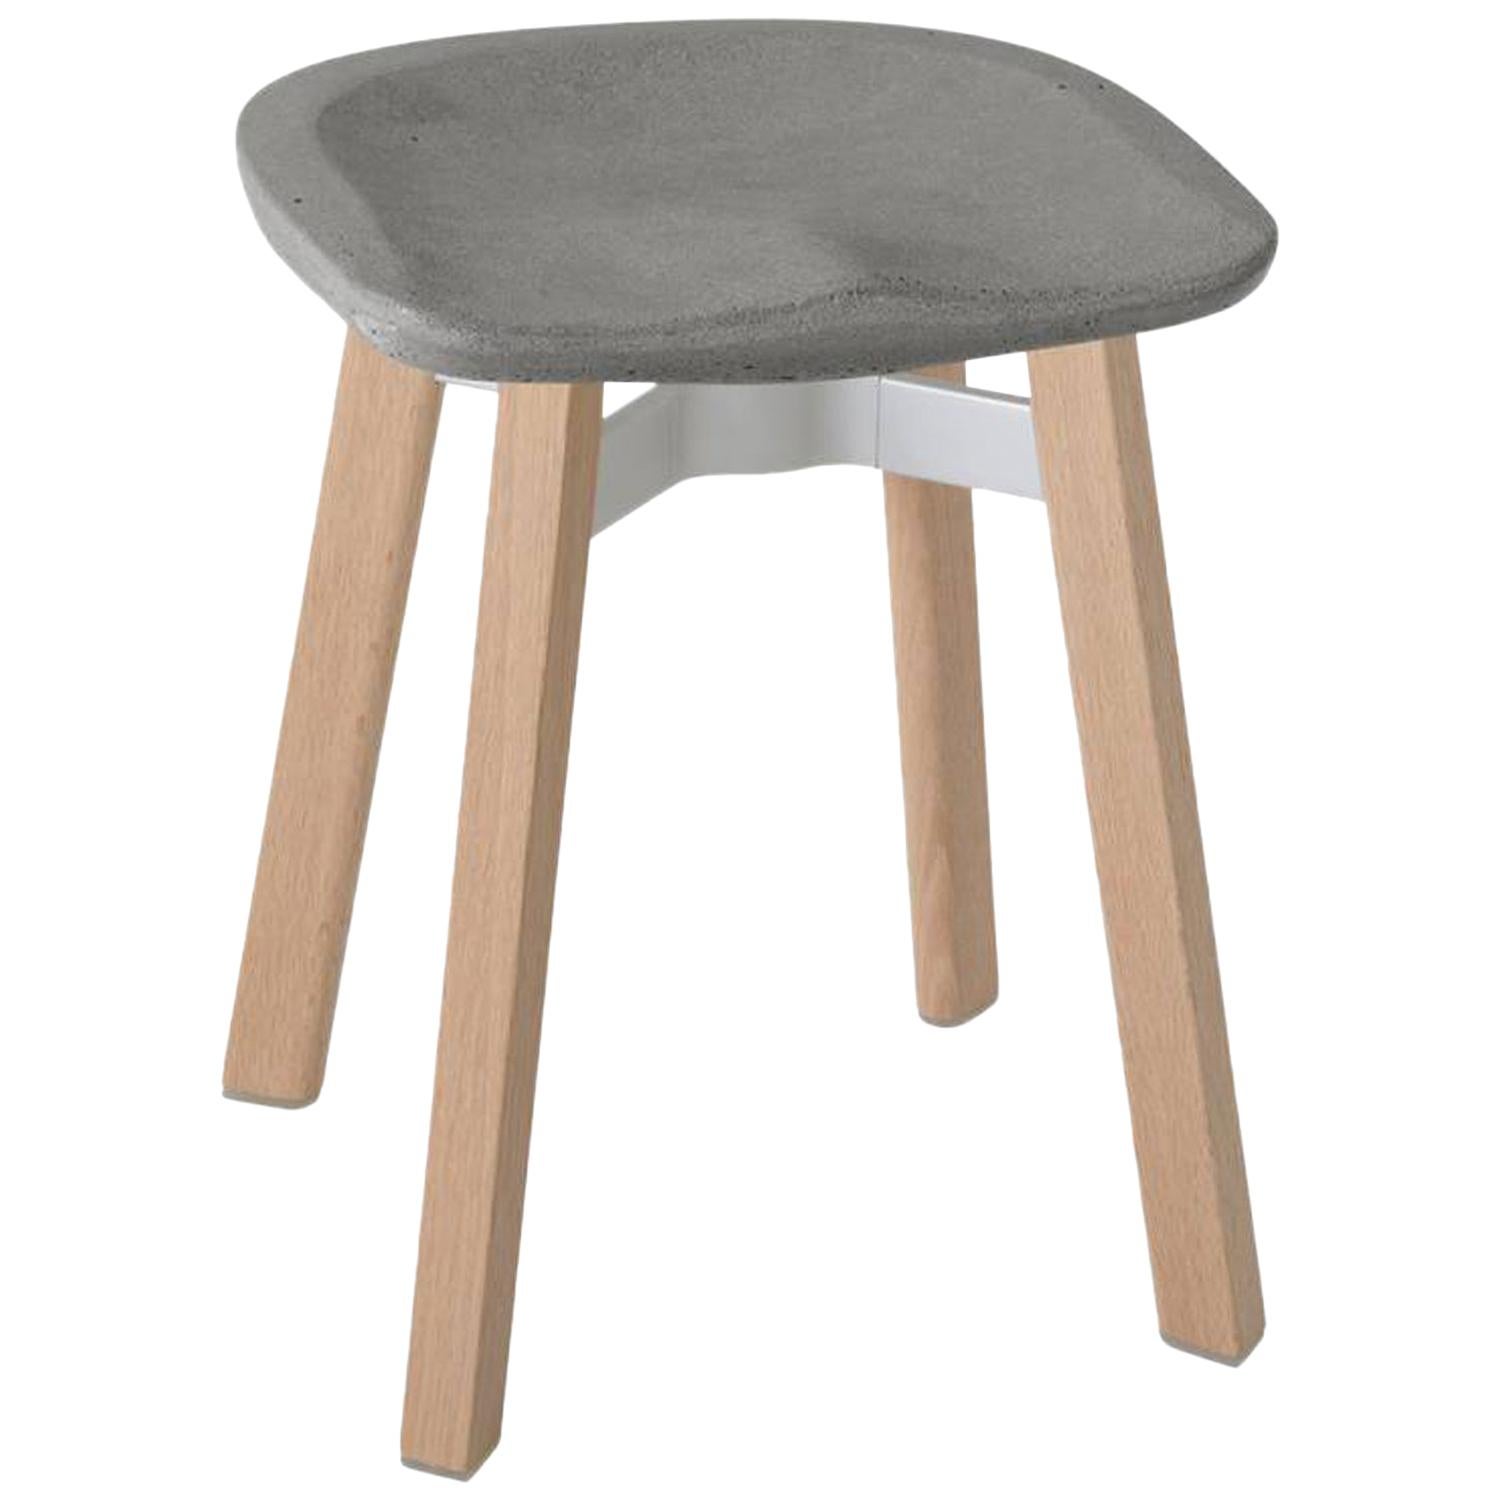 Emeco Su Small Stool in Wood with Eco Concrete Seat by Nendo For Sale